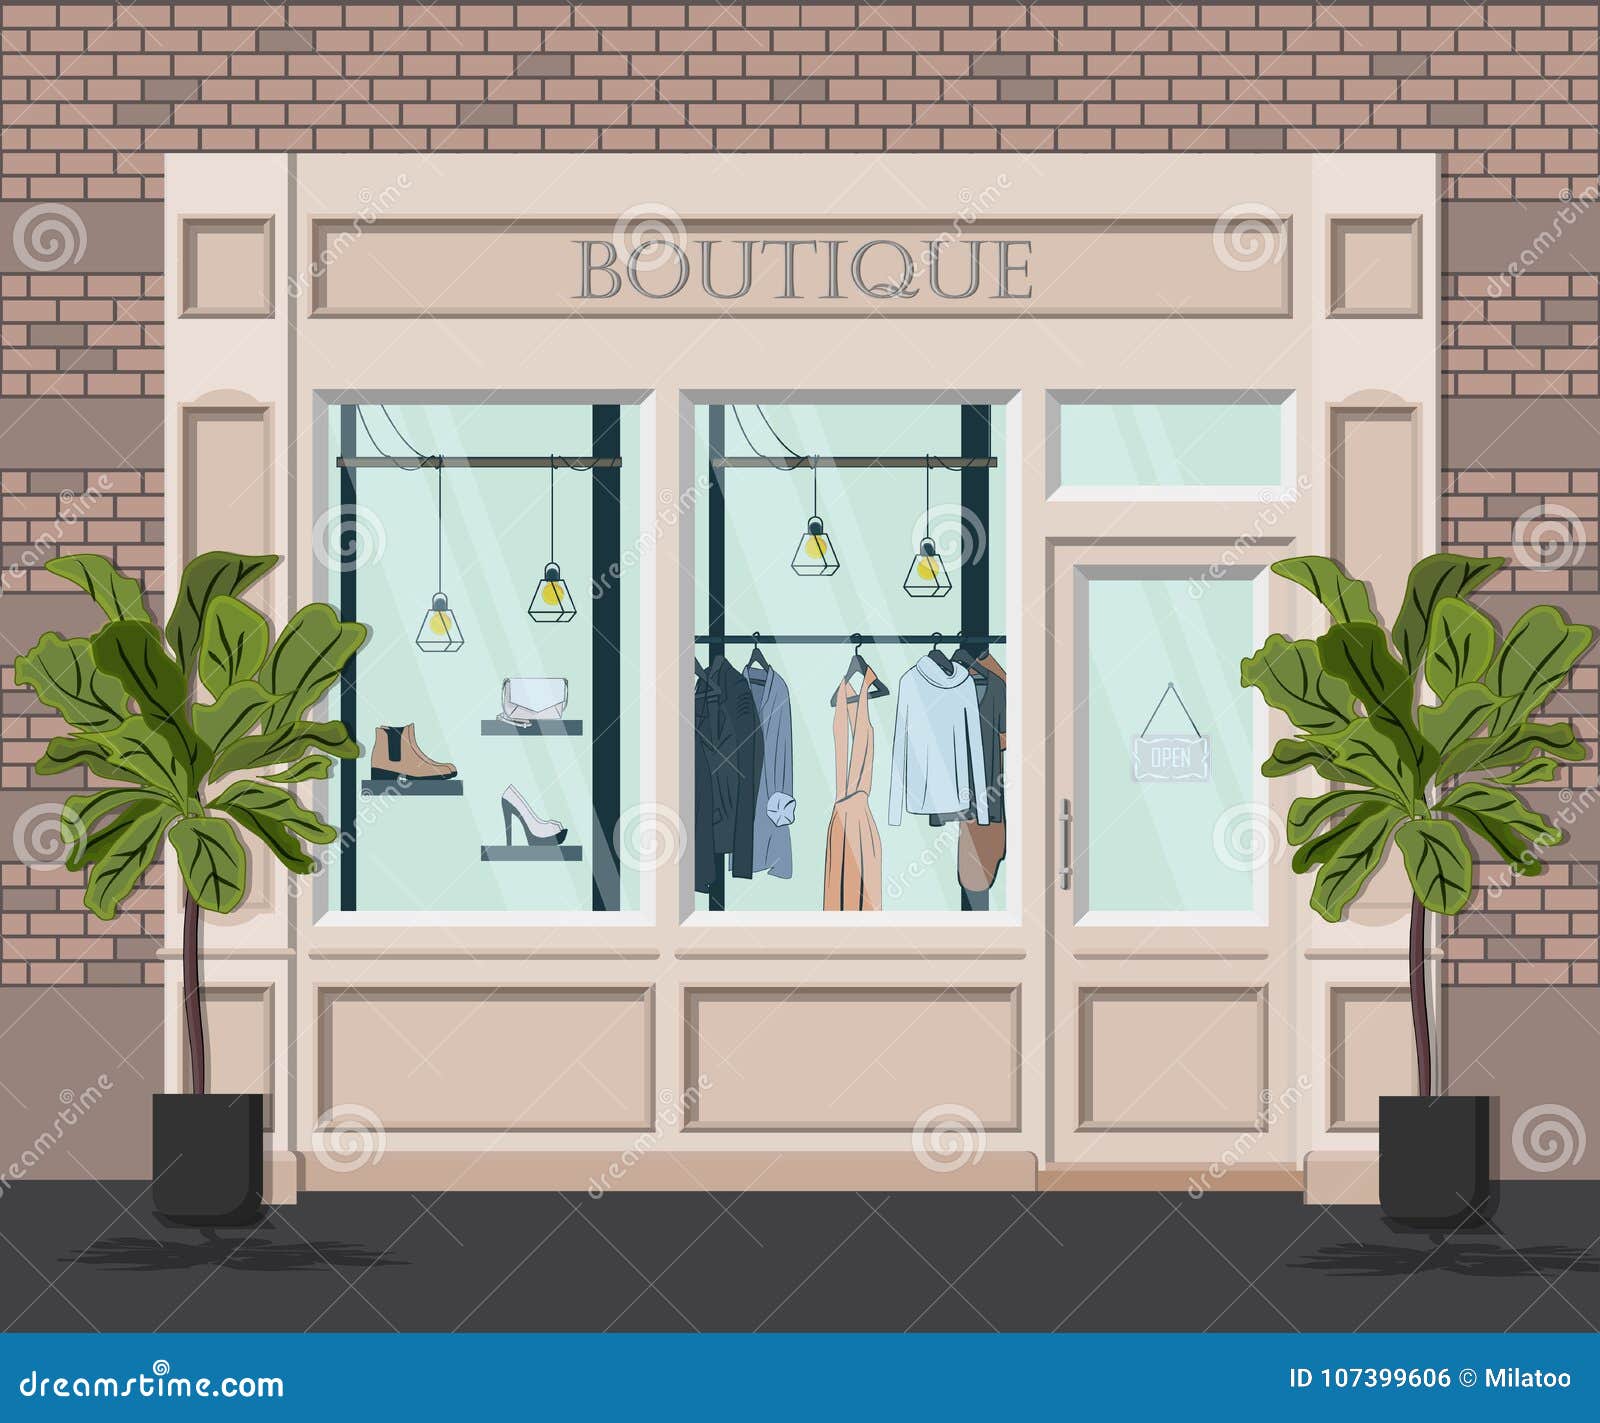 graphic  facade vintage boutique. detailed  of a clothes shop in a flat style. retail storefront. european fashi